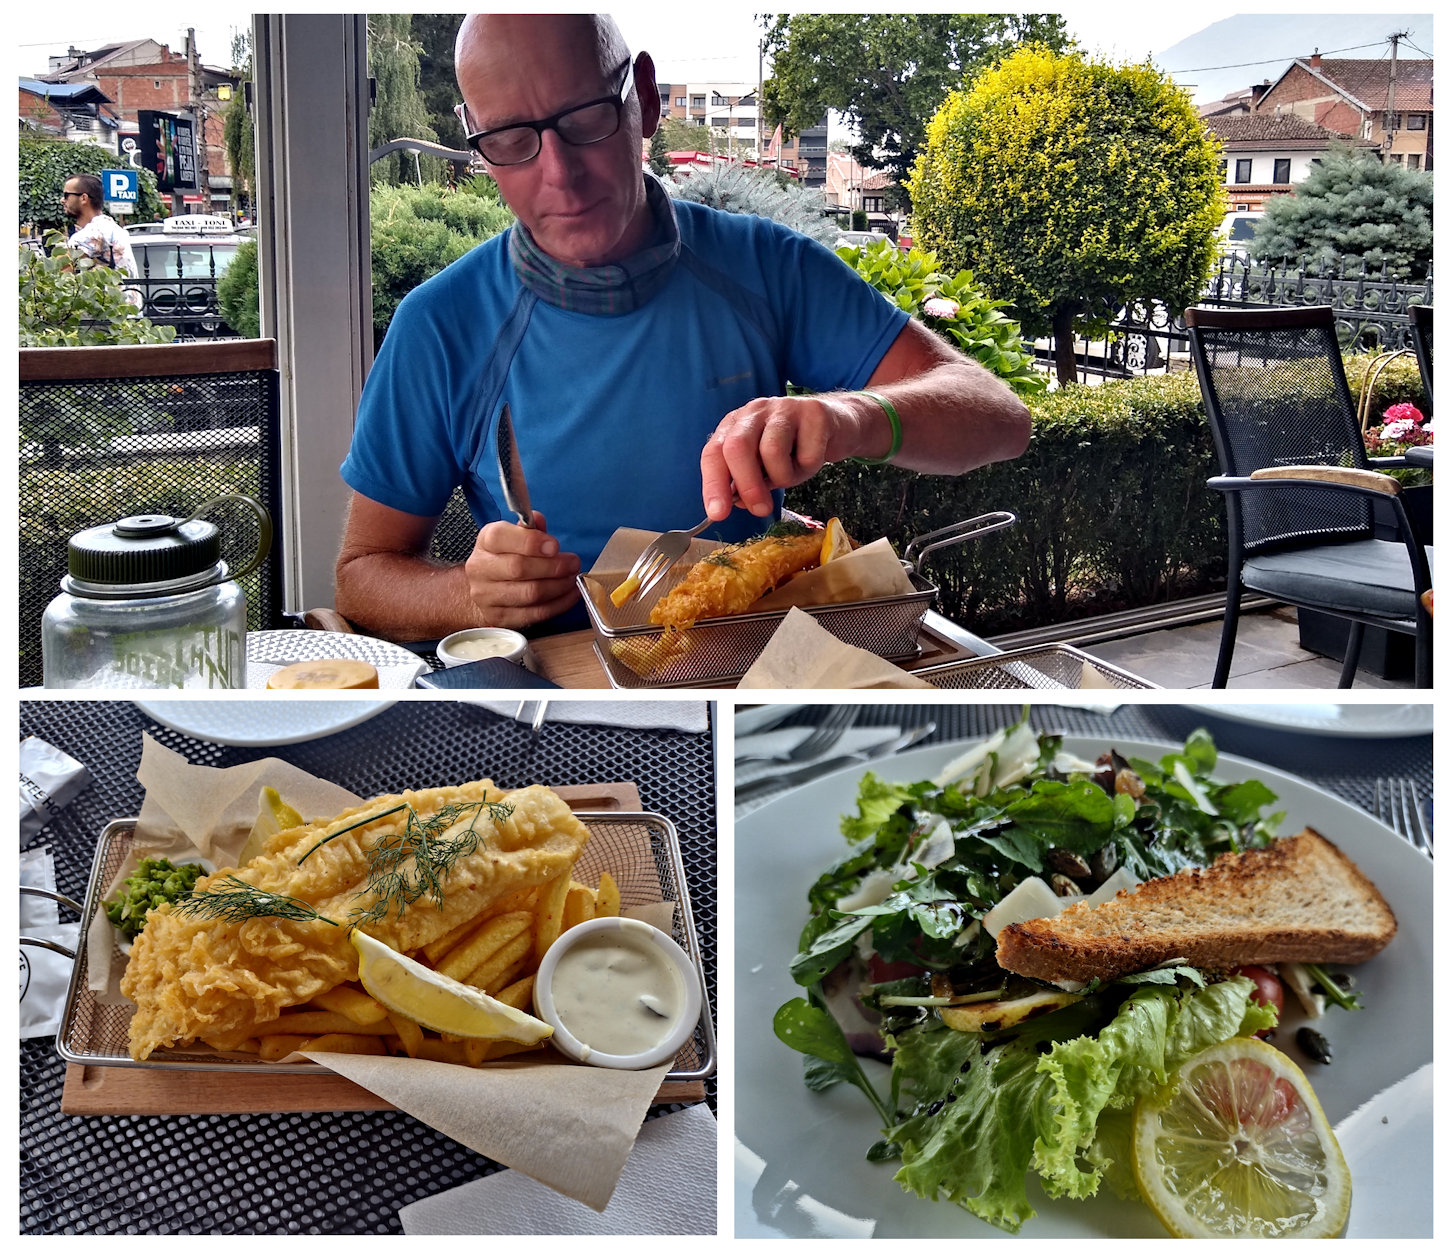 Nev eating fish and chips and a nice sandwich and salad for Rebecca.